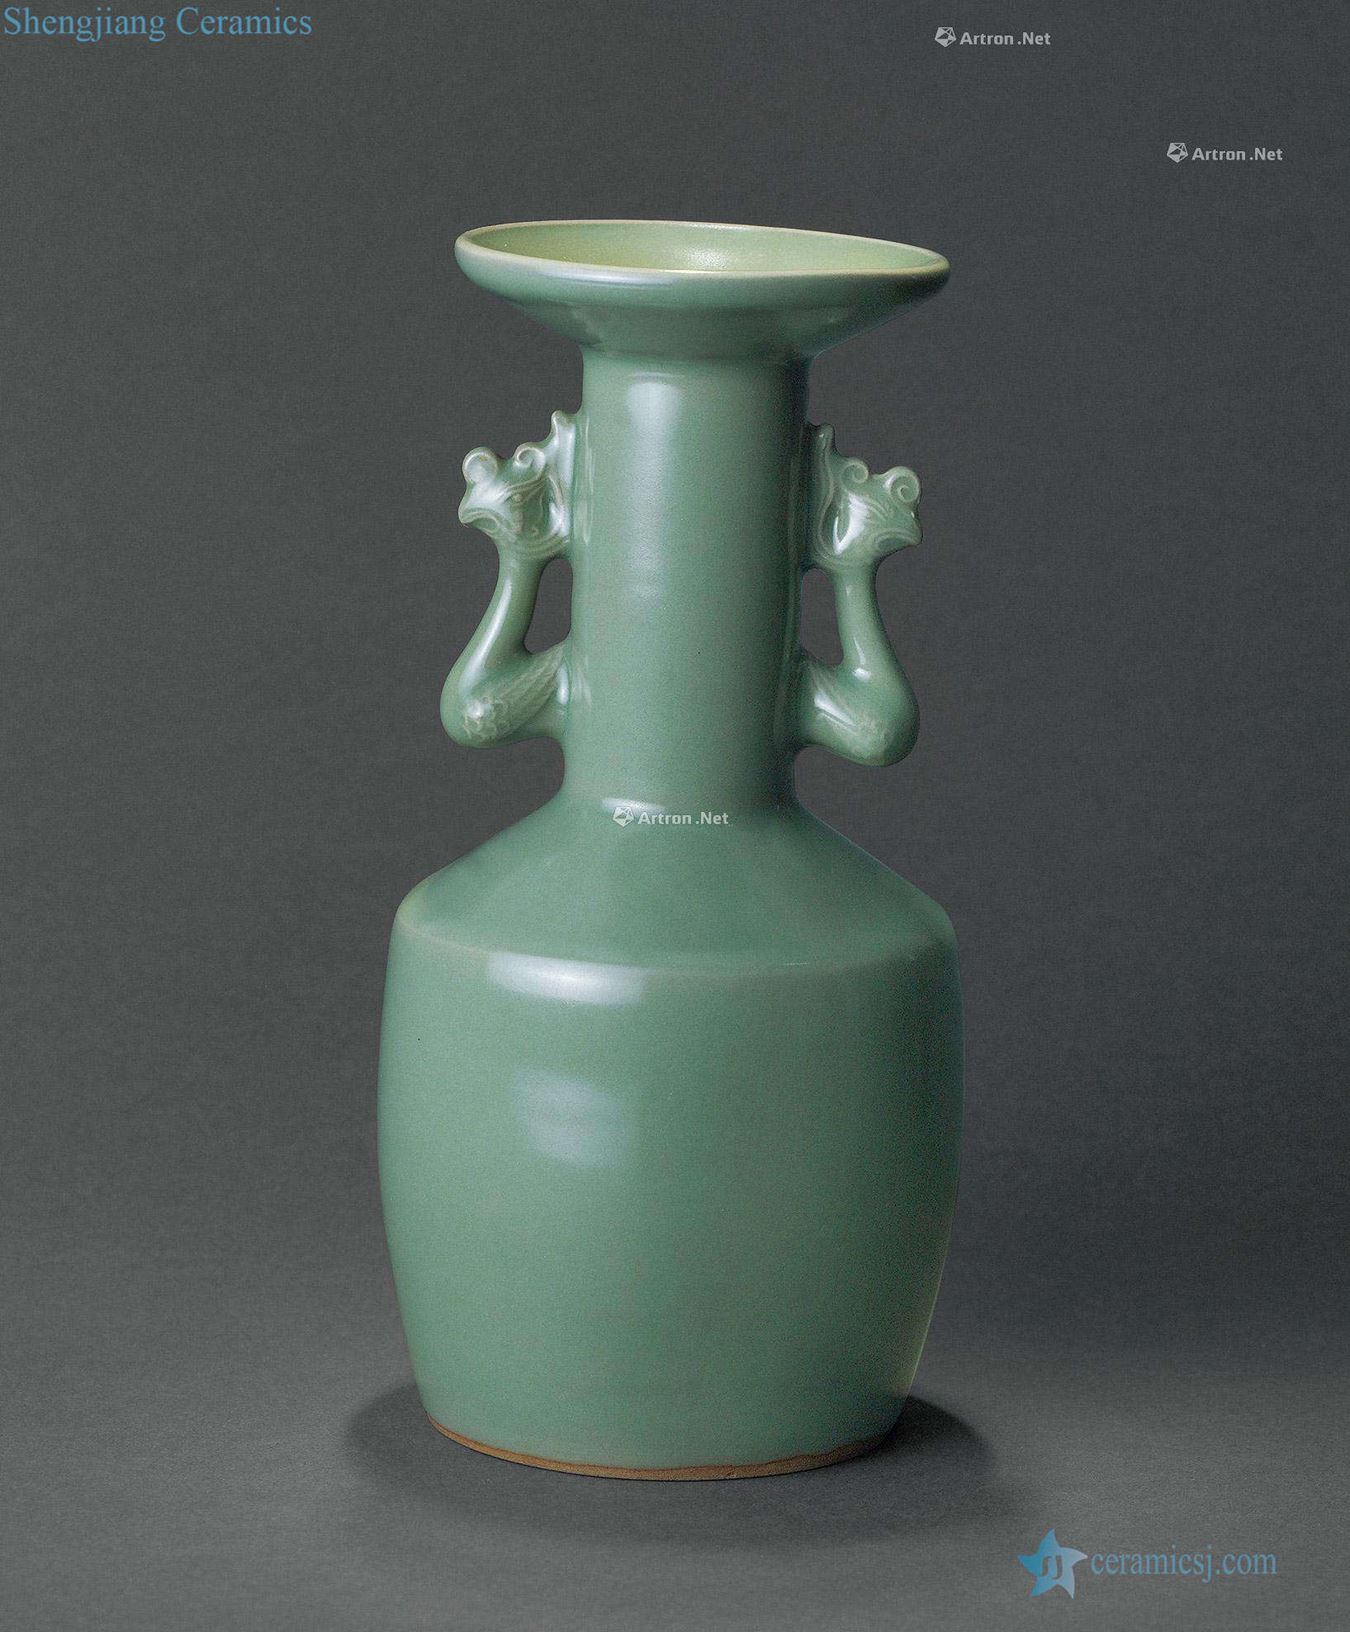 The southern song dynasty Longquan celadon azure glaze vase with a chicken